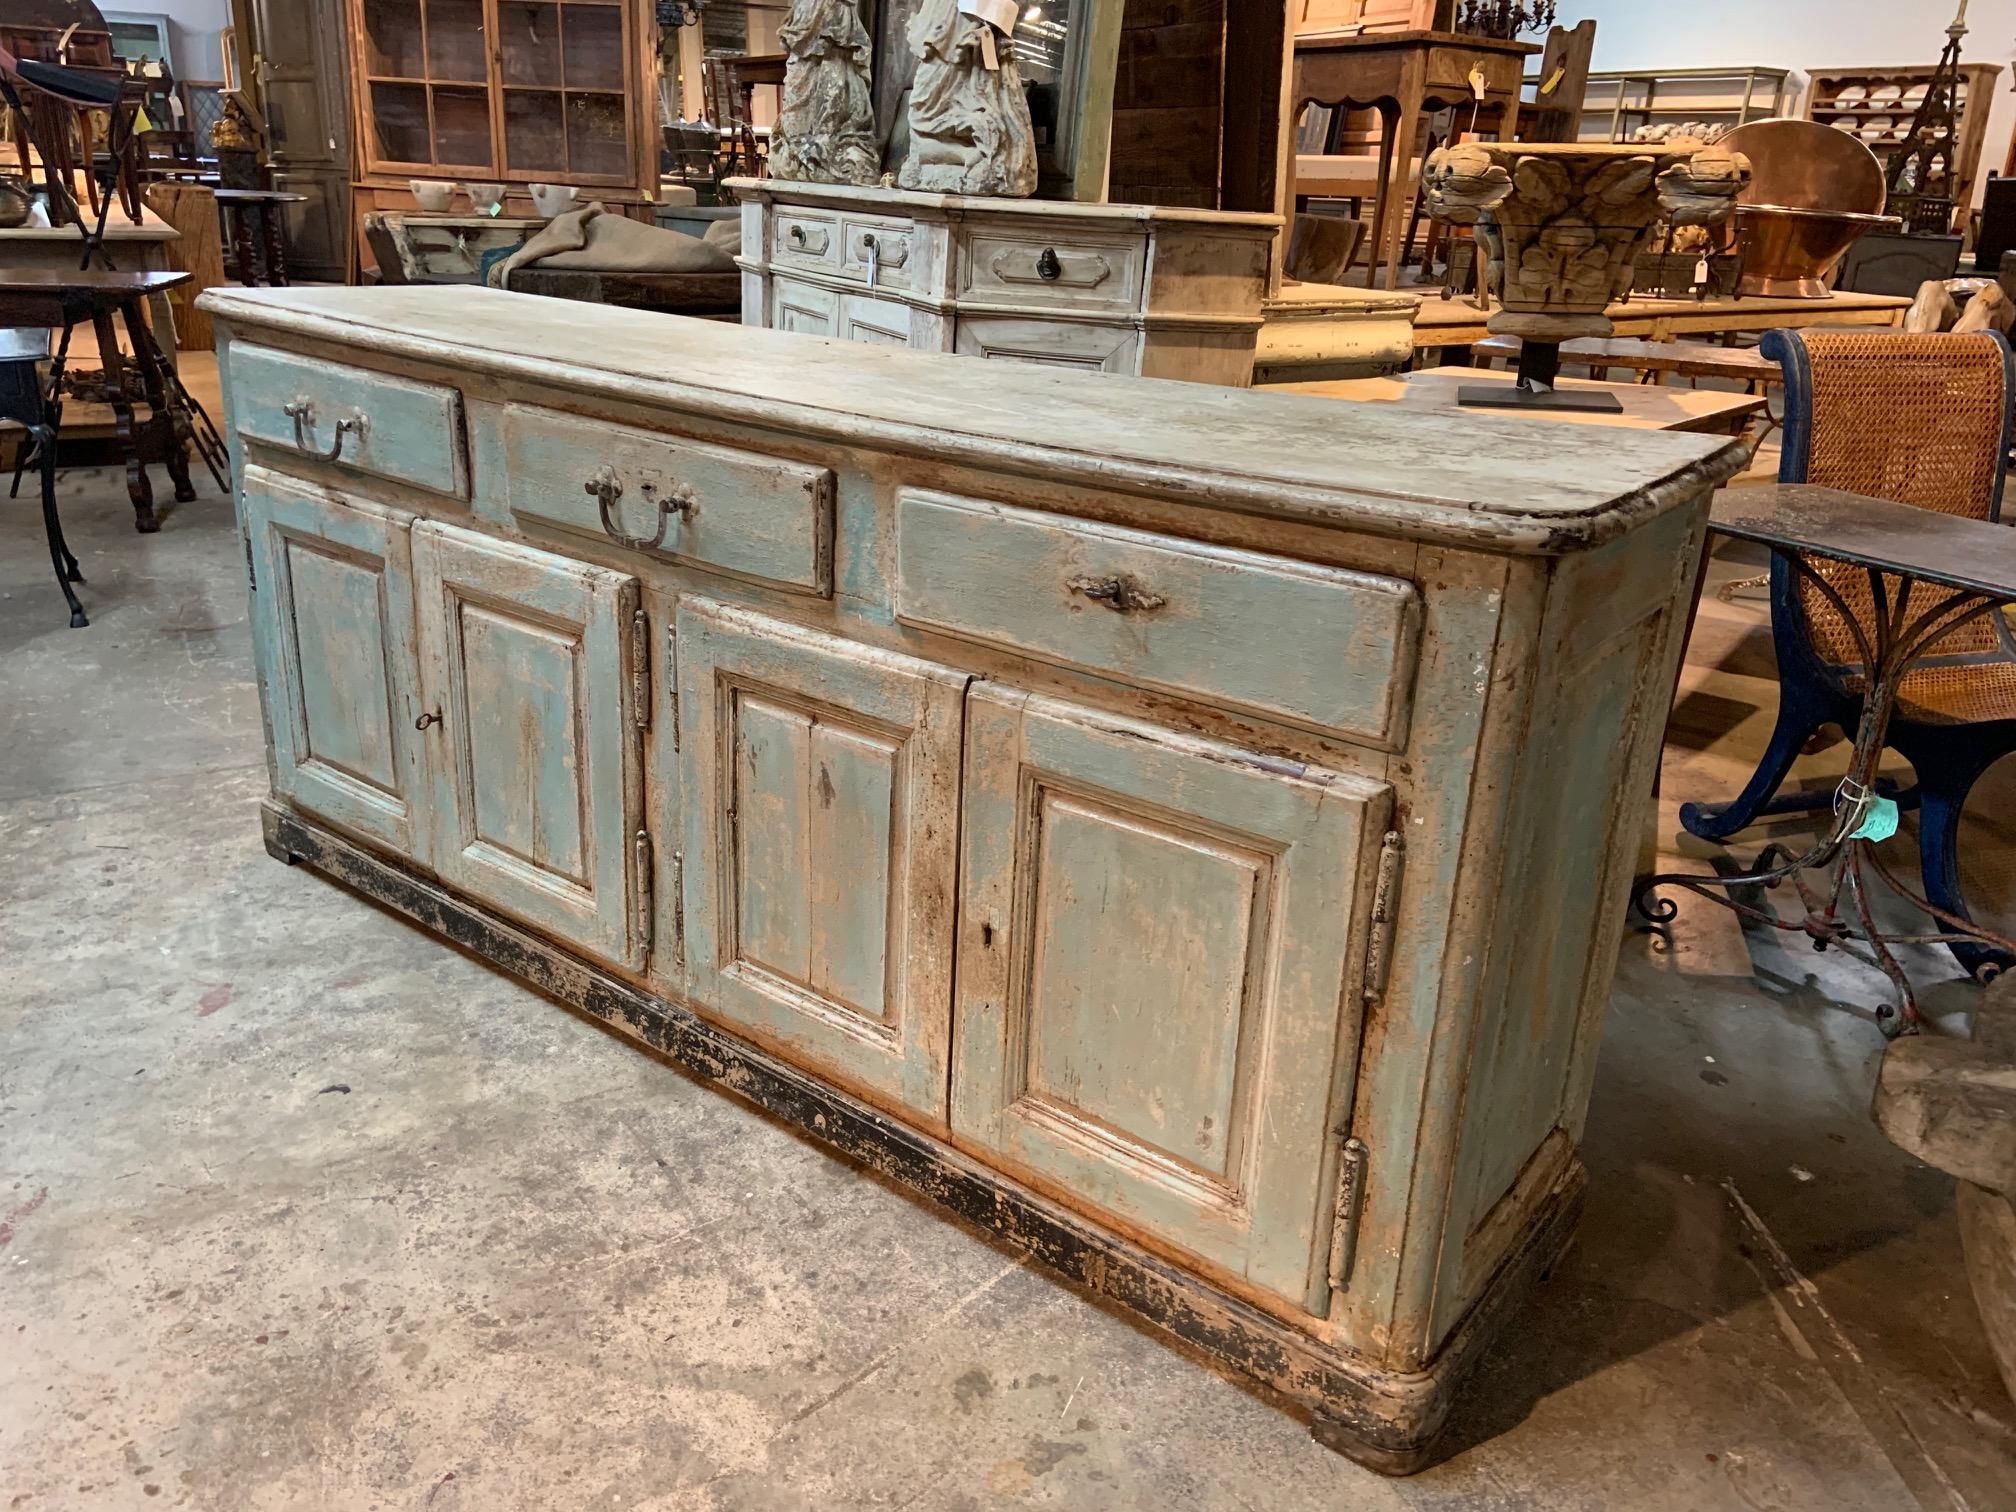 A very handsome Enfilade - buffet from the Provenance region of France. Wonderfully constructed from painted wood. A terrific storage piece with four doors and three drawers. Great patina.